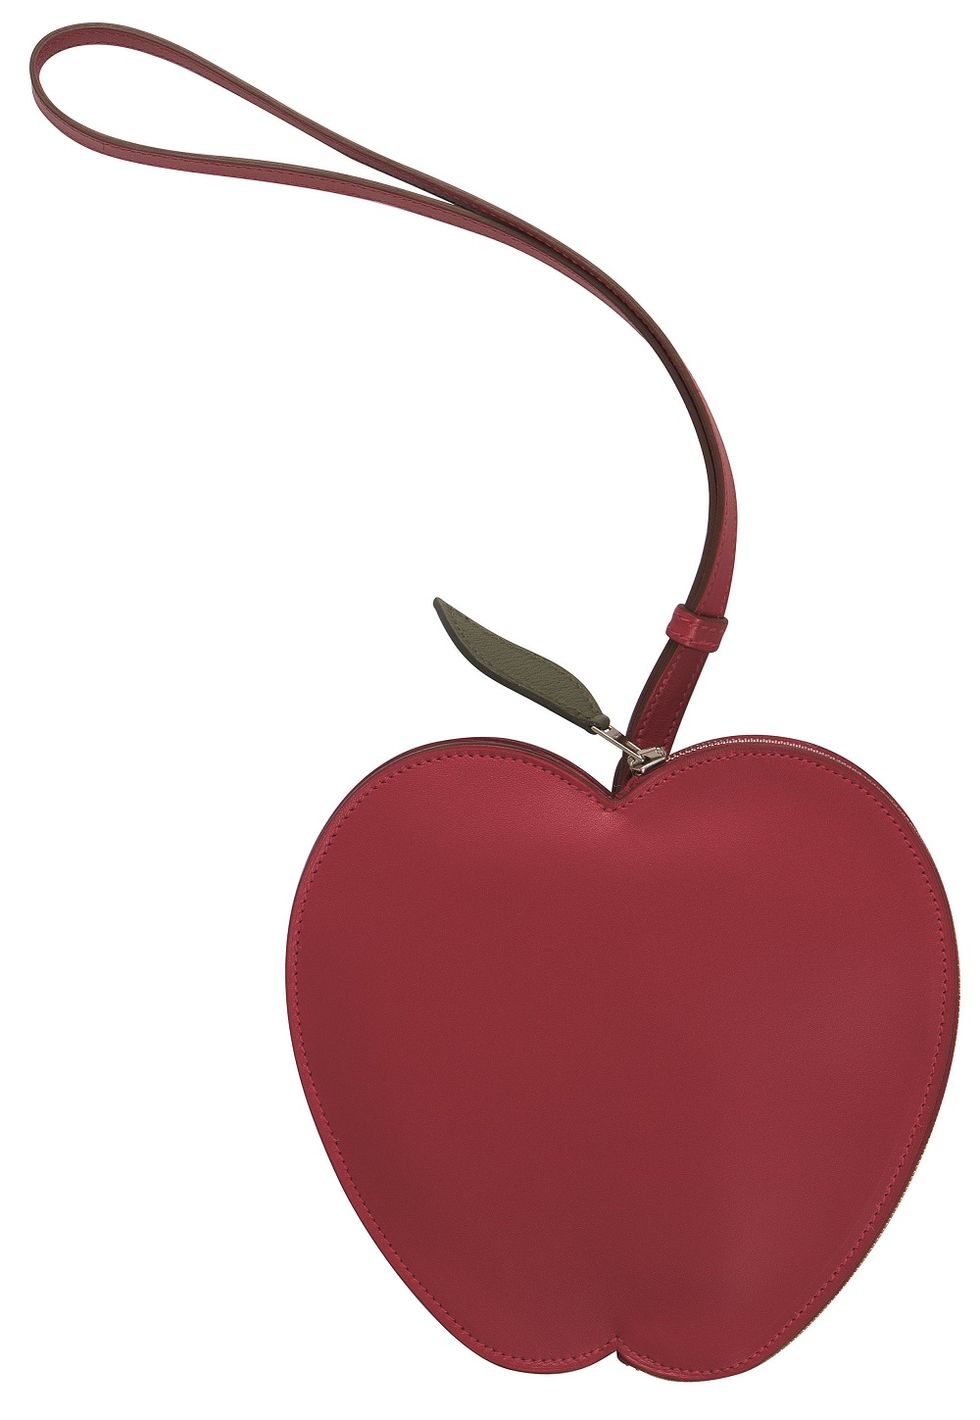 Red, Leaf, Produce, Fruit, Carmine, Maroon, Coquelicot, Apple, Graphics, Clip art, 